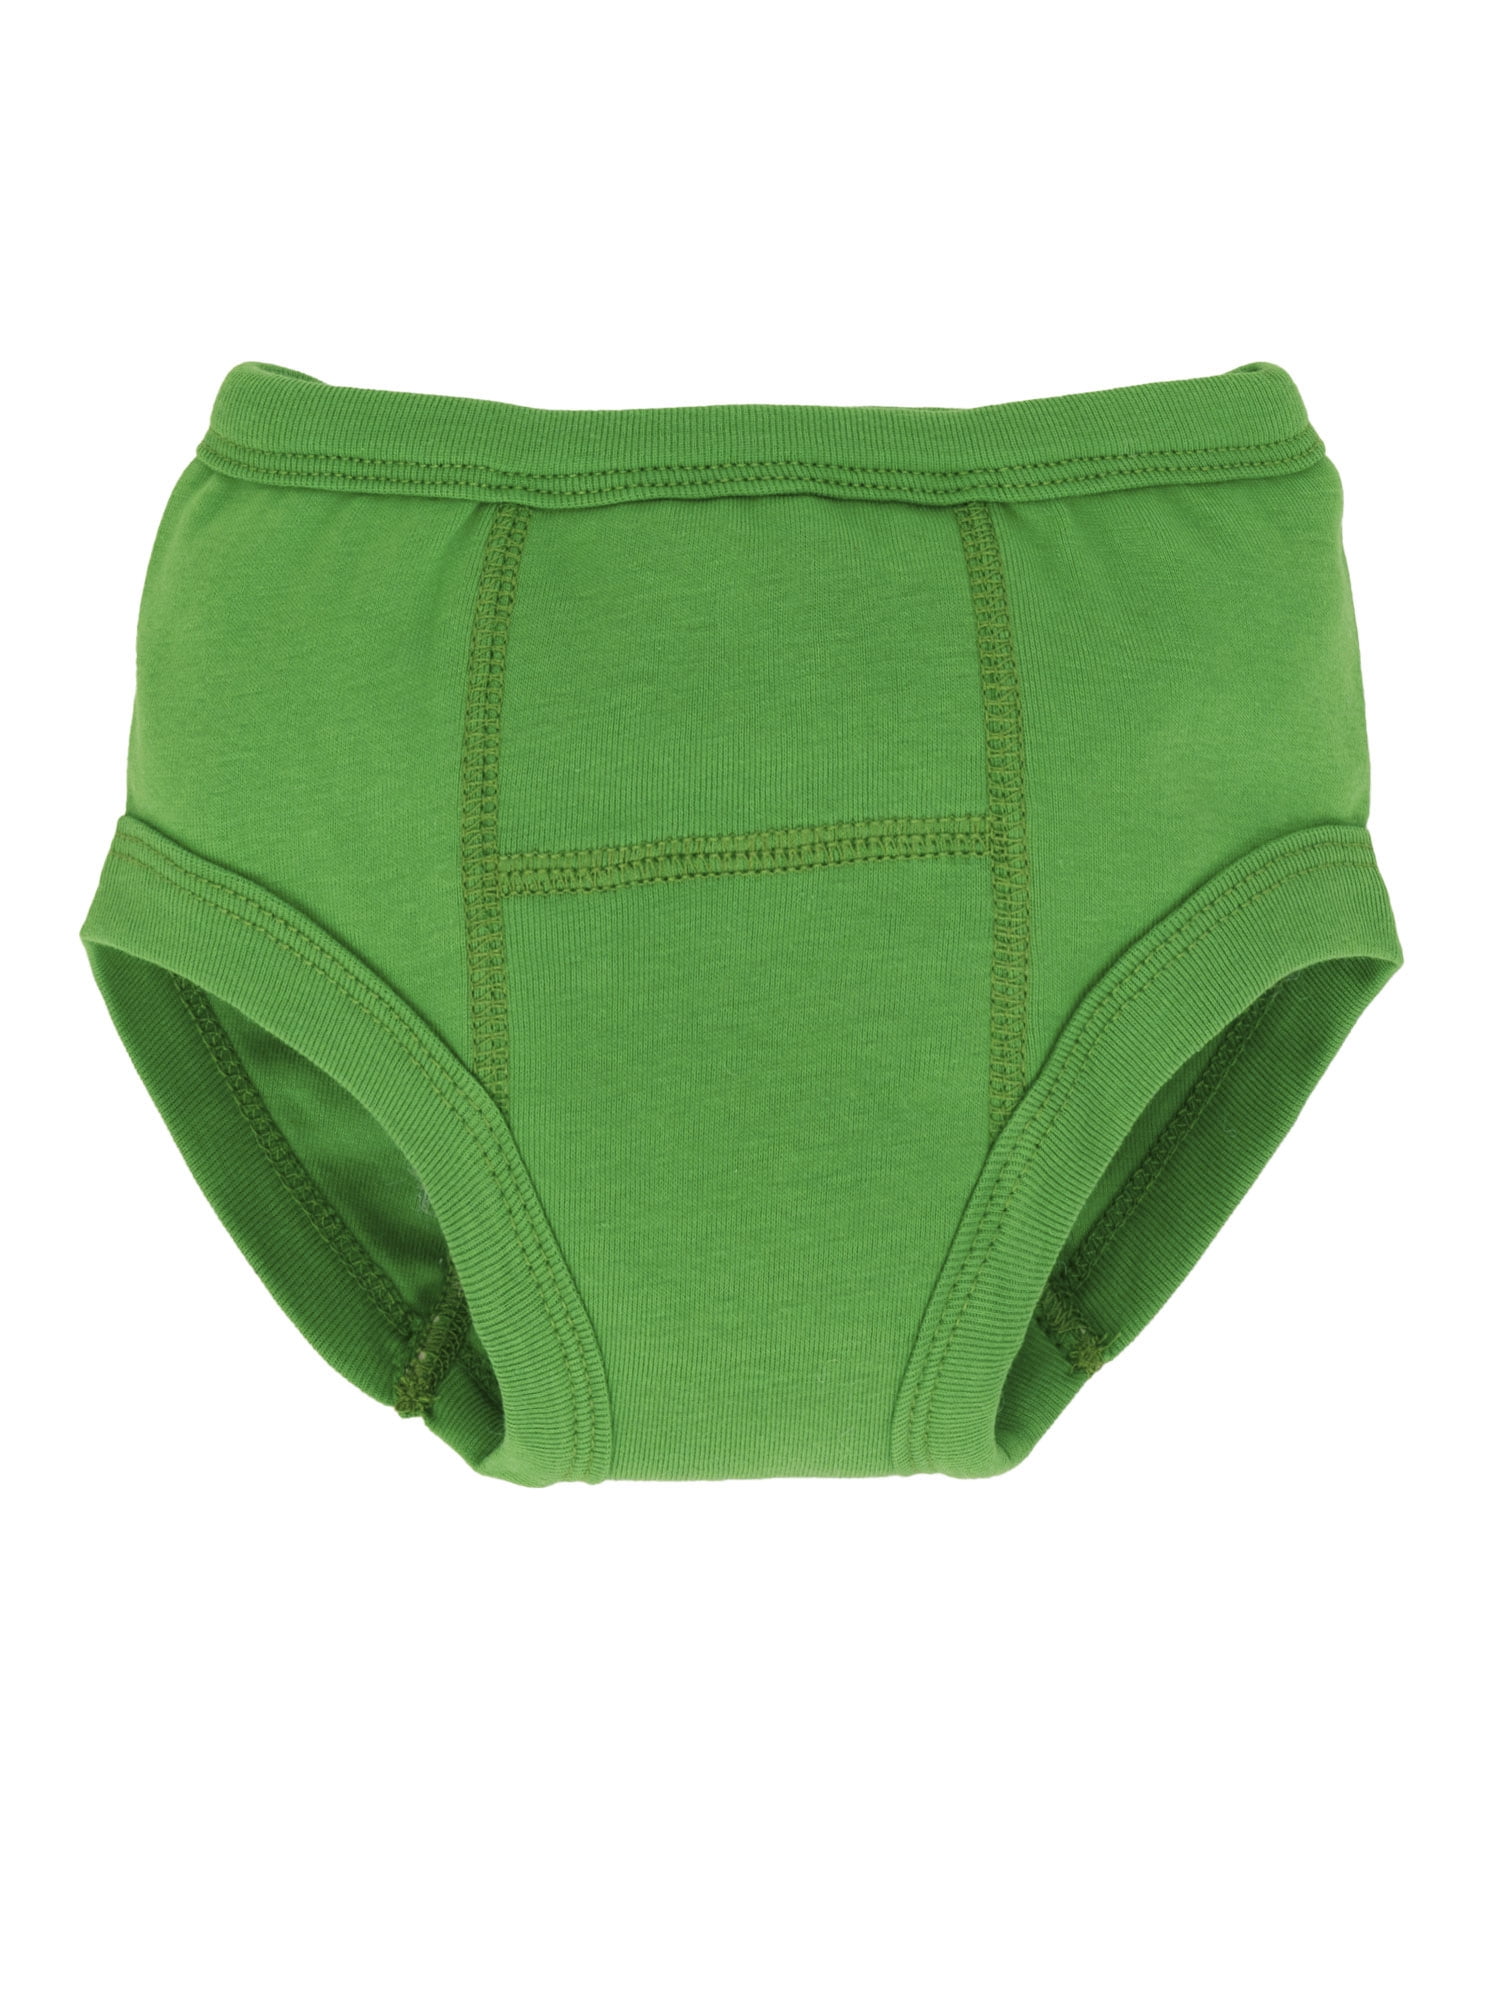 Best Cloth Potty Training Pants for Toddlers  Babies  Review  EC Peesy